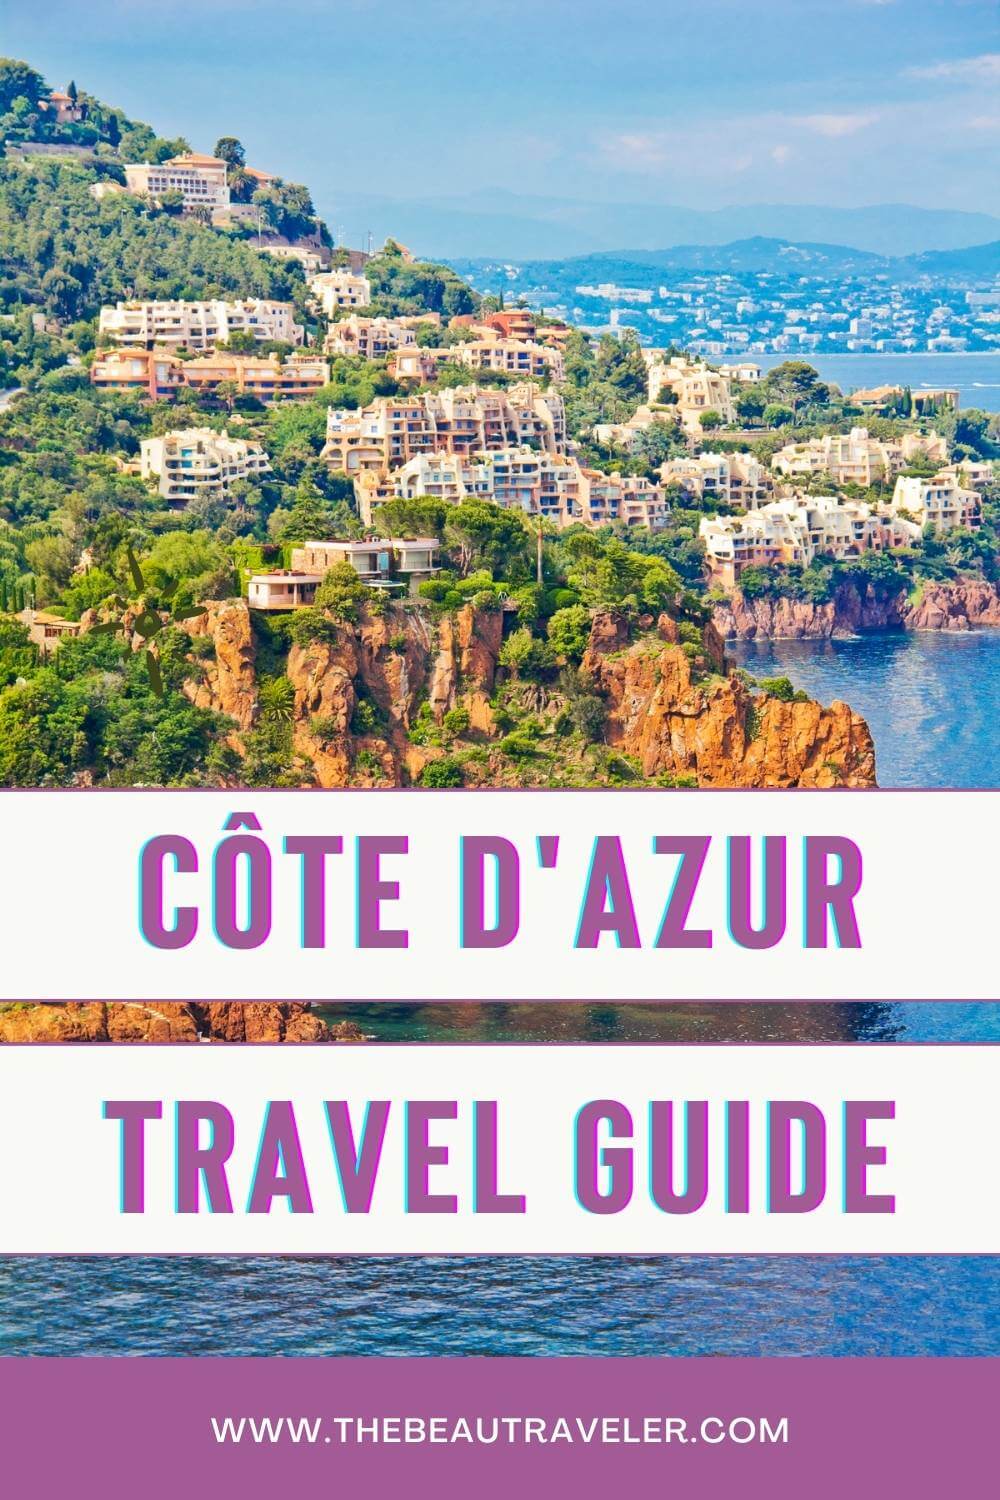 How to Get to the Côte d’Azur and What to Visit in the French Riviera - The BeauTraveler